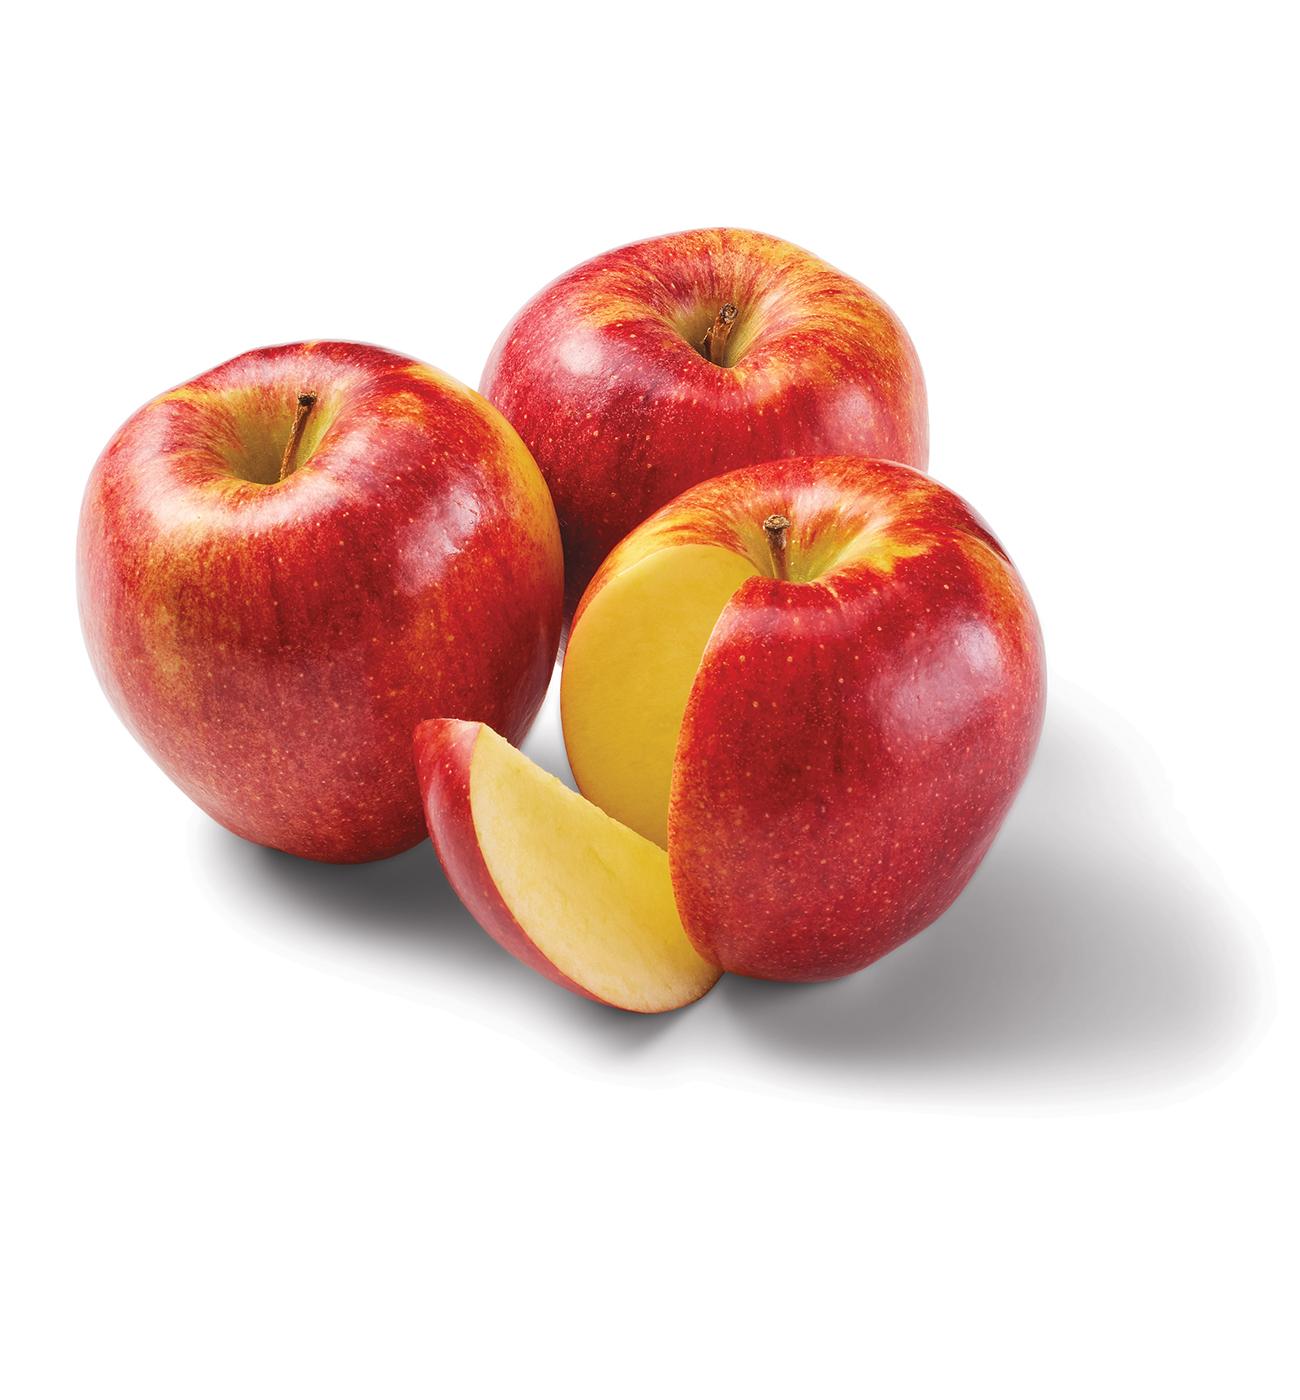 Envy™ Apples Information and Facts